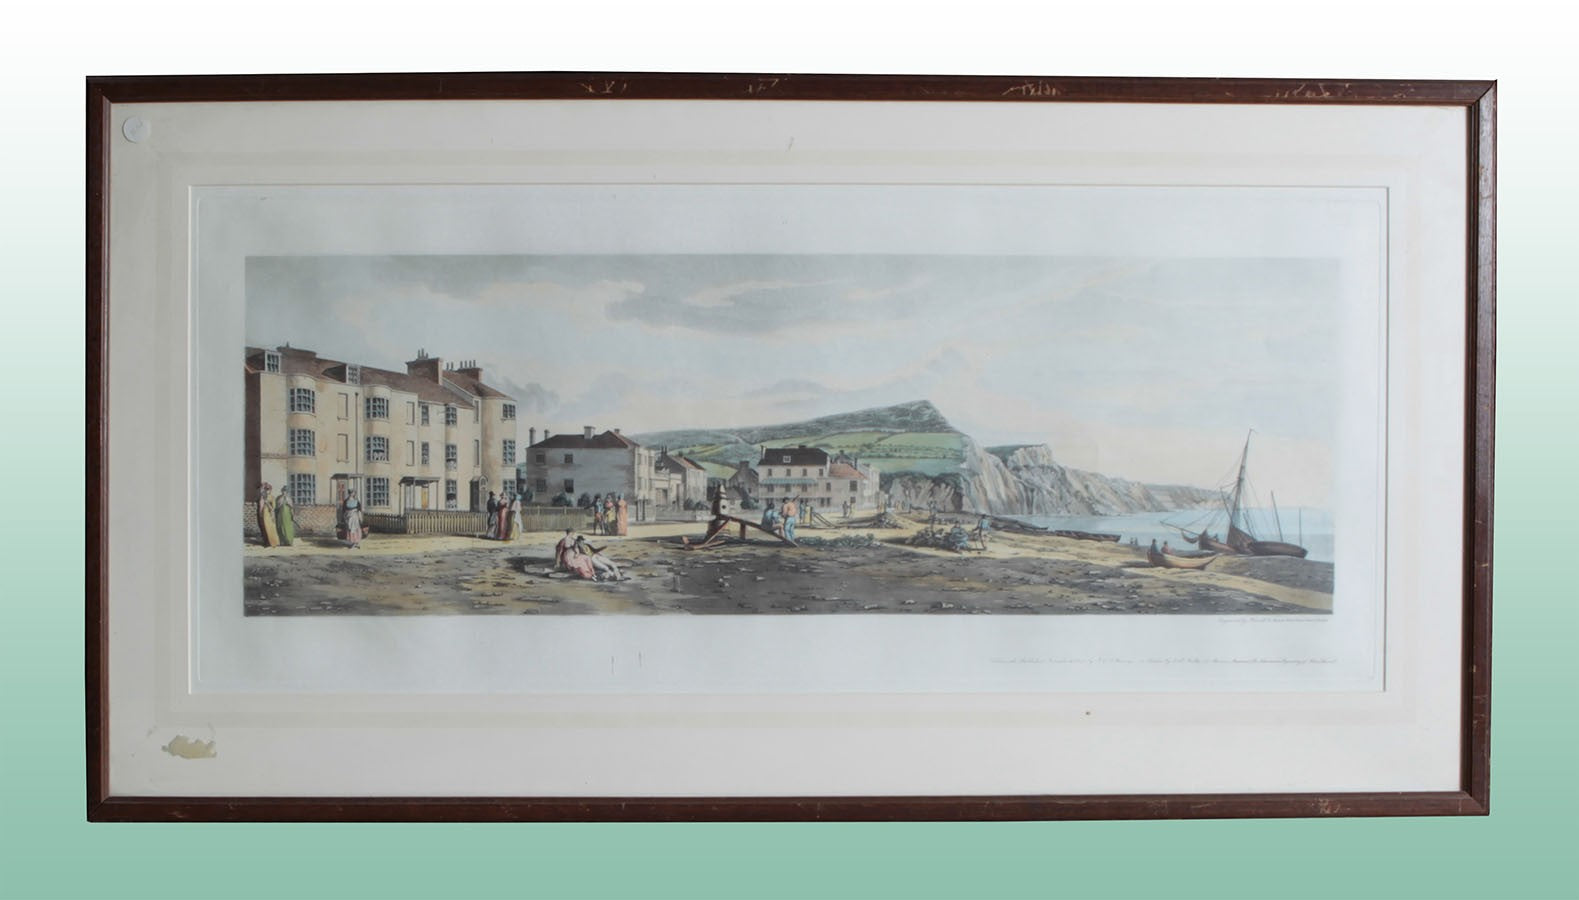 Antique English color Engraving from 1900 depicting a seaside town